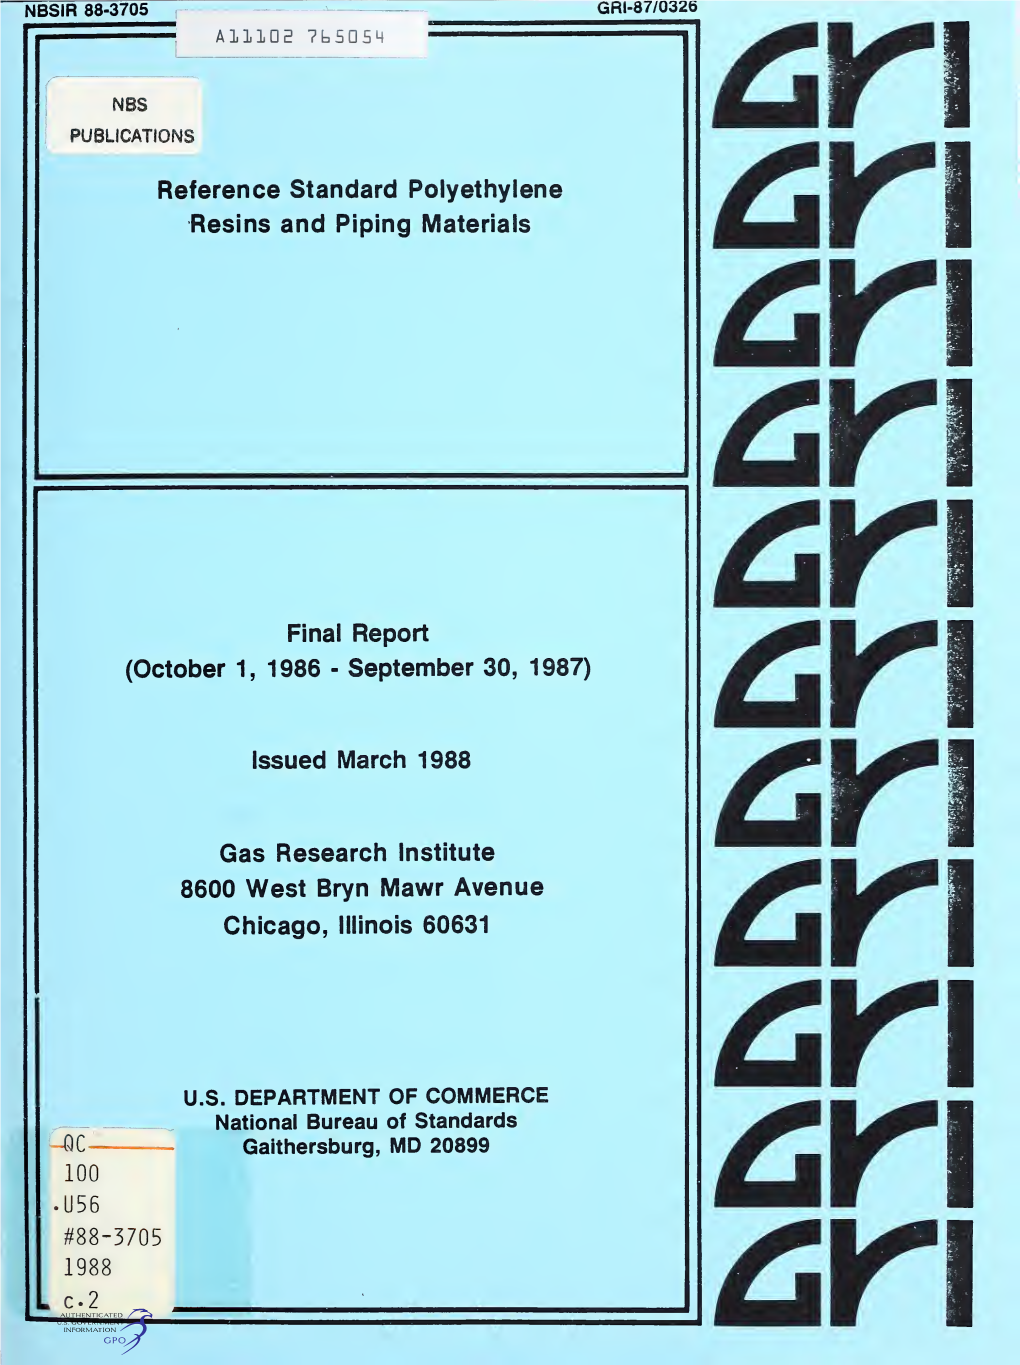 Reference Standard Polyethylene Resins and Piping Materials an an Anar\ Final Report (October 1, 1986 - September 30, 1987) an Issued March 1988